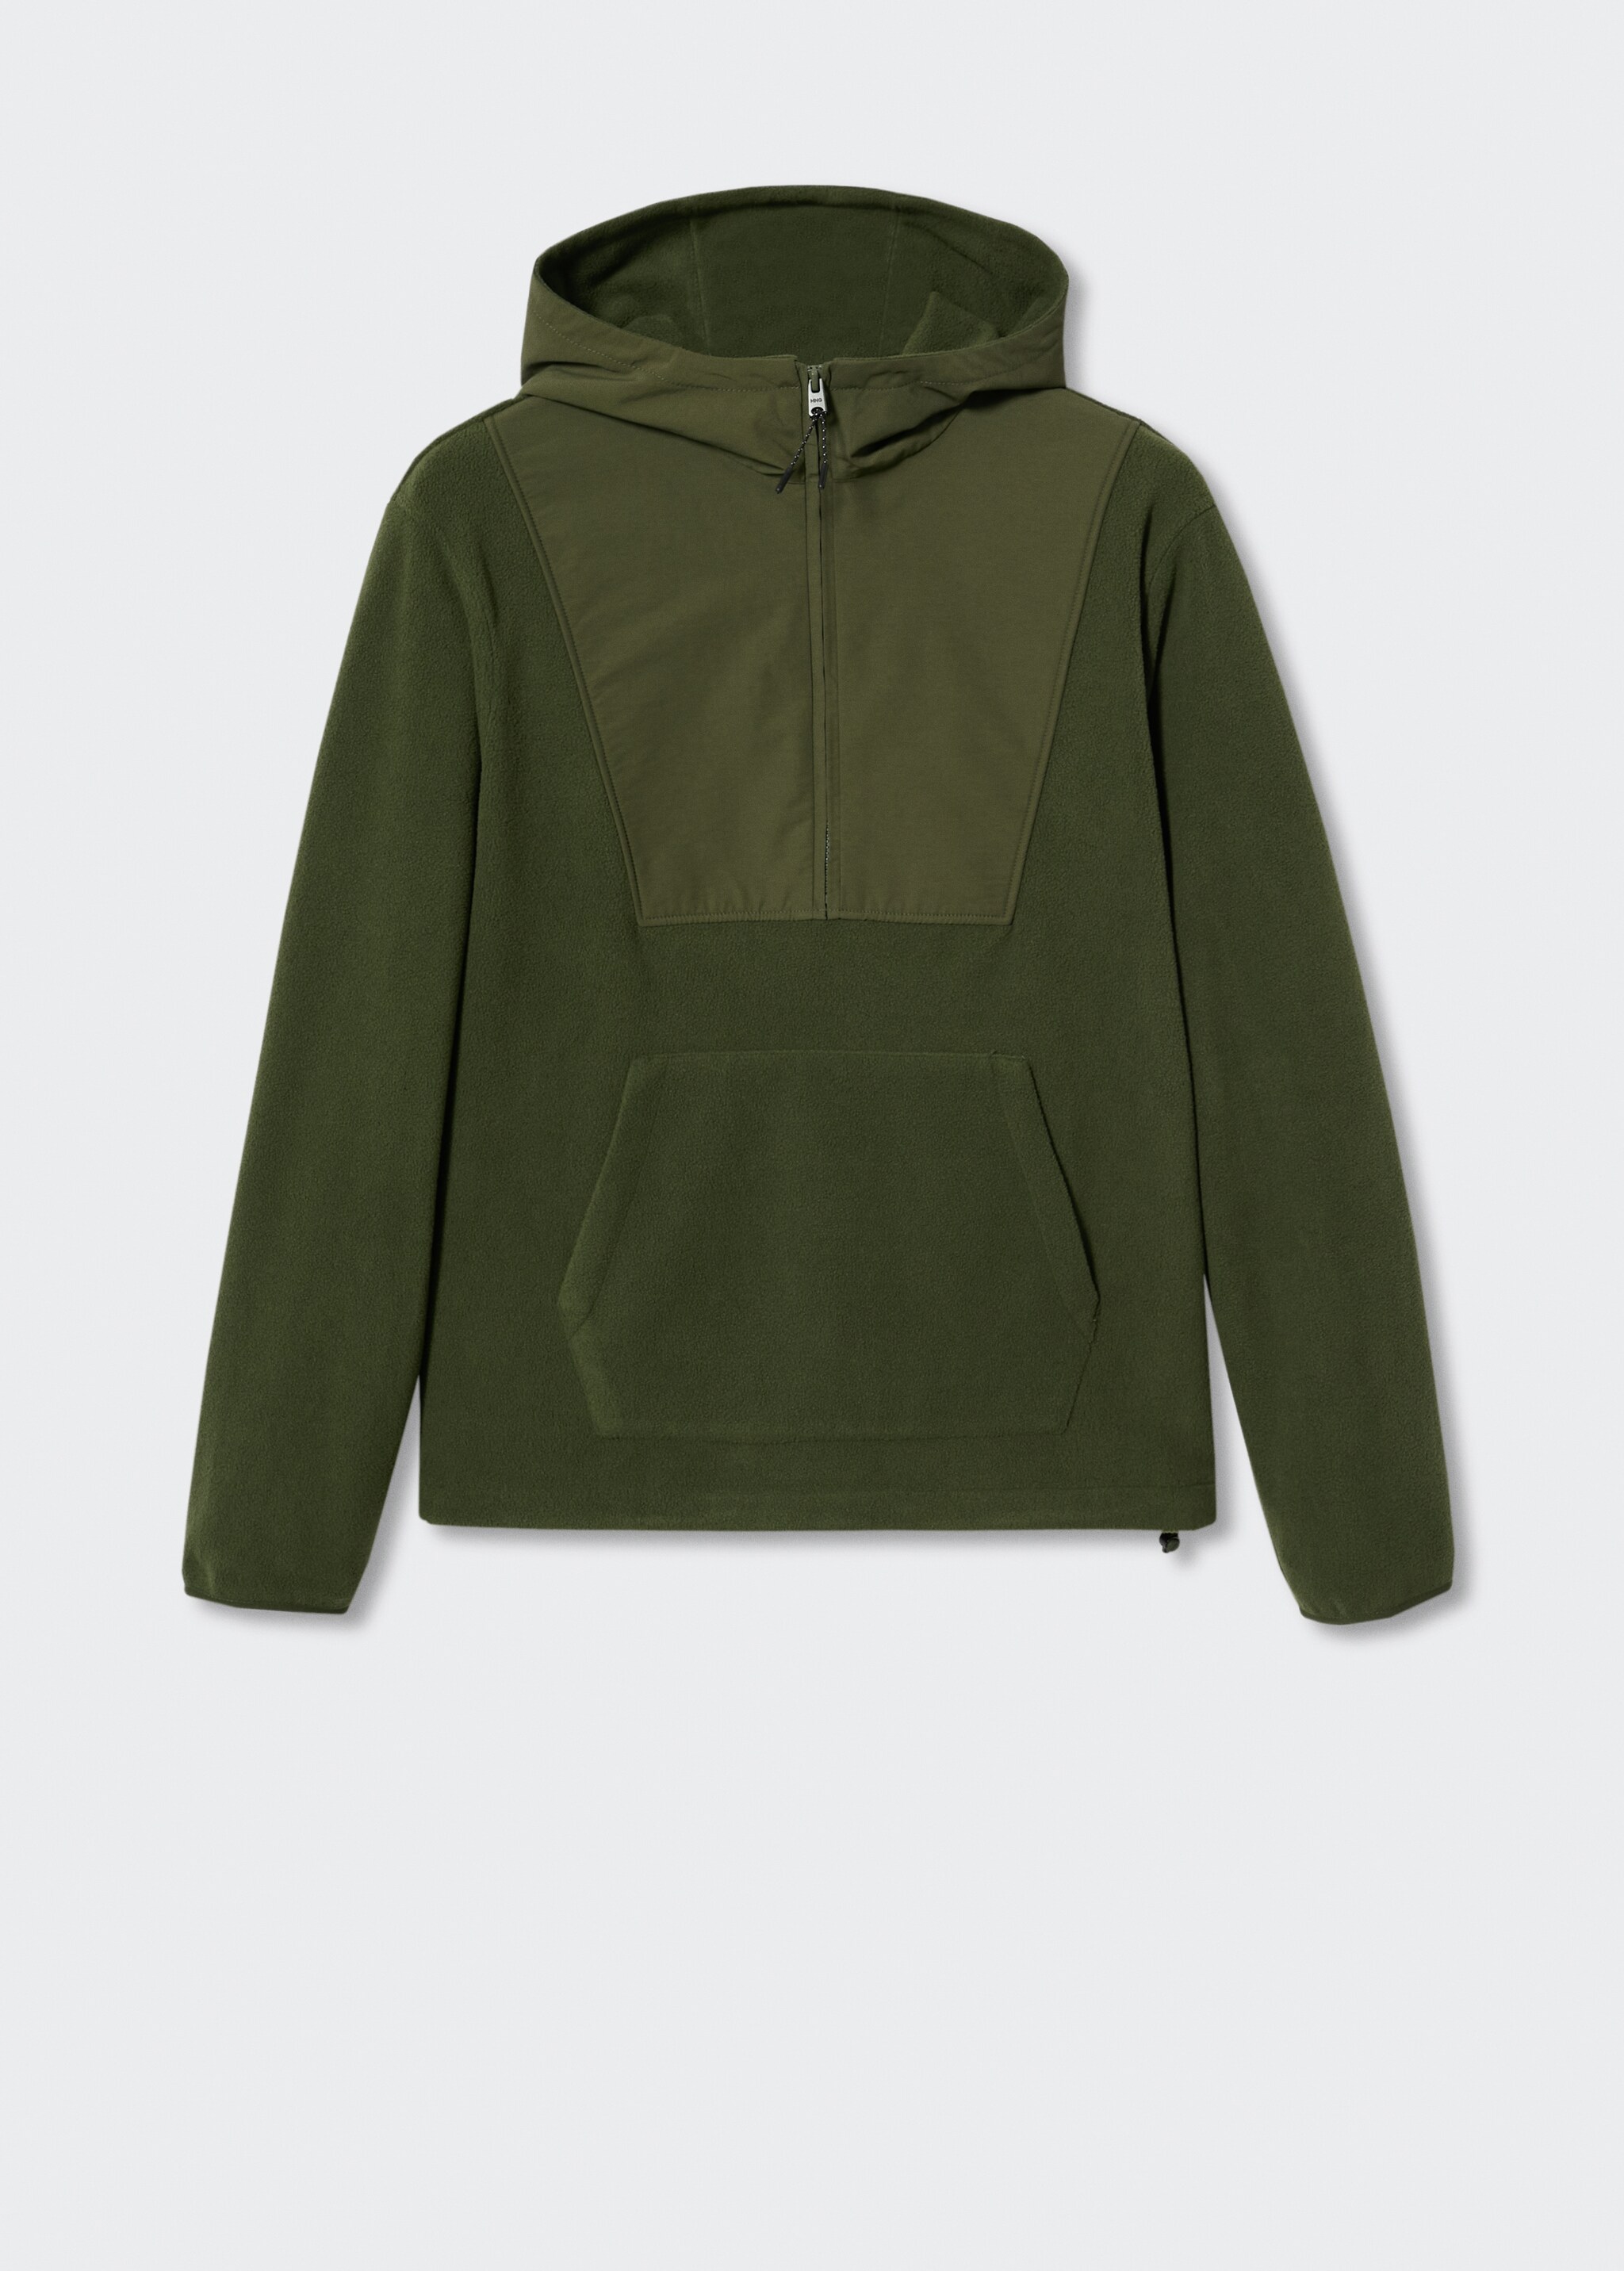 Combined hooded sweatshirt - Article without model